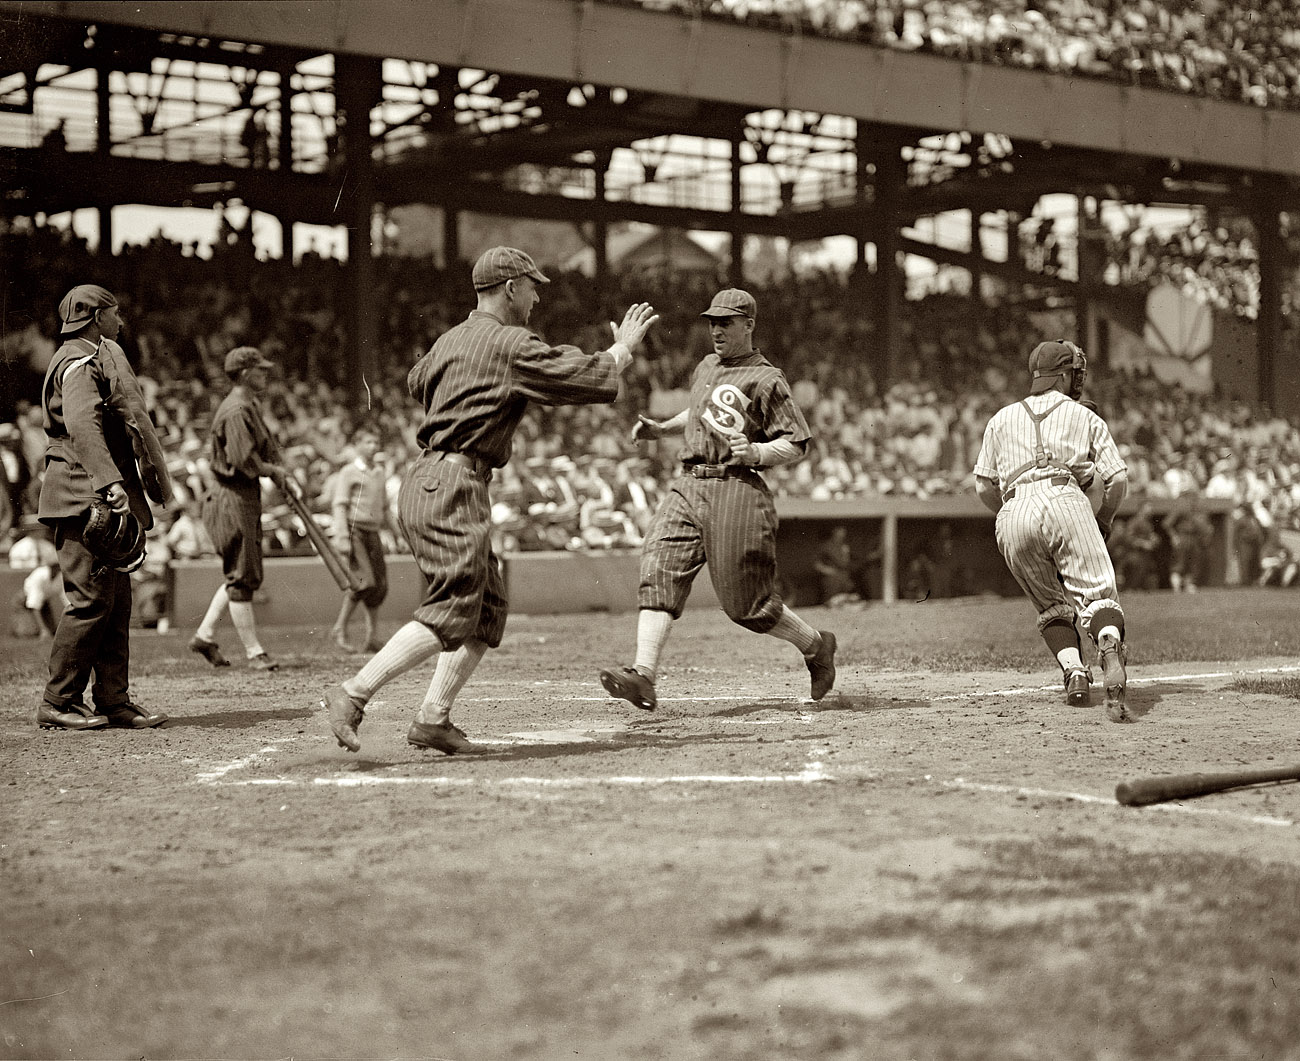 The White Sox in Washington playing the Senators. "Schalk & Mostil, Chicago, 1925." View full size. National Photo Company Collection glass negative.